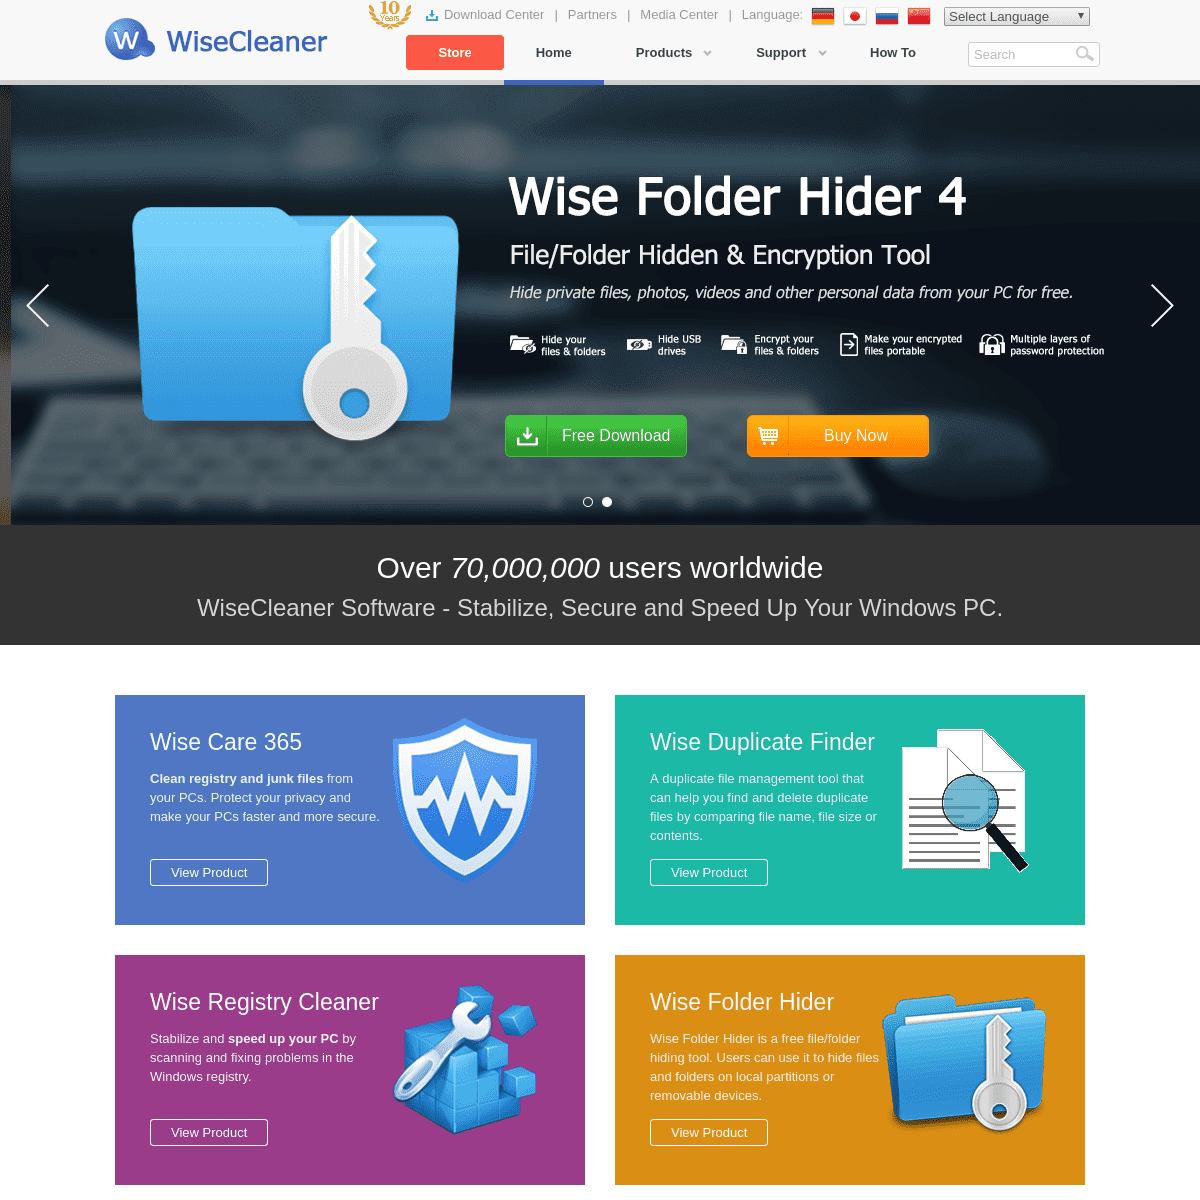 wisecleaner checkit